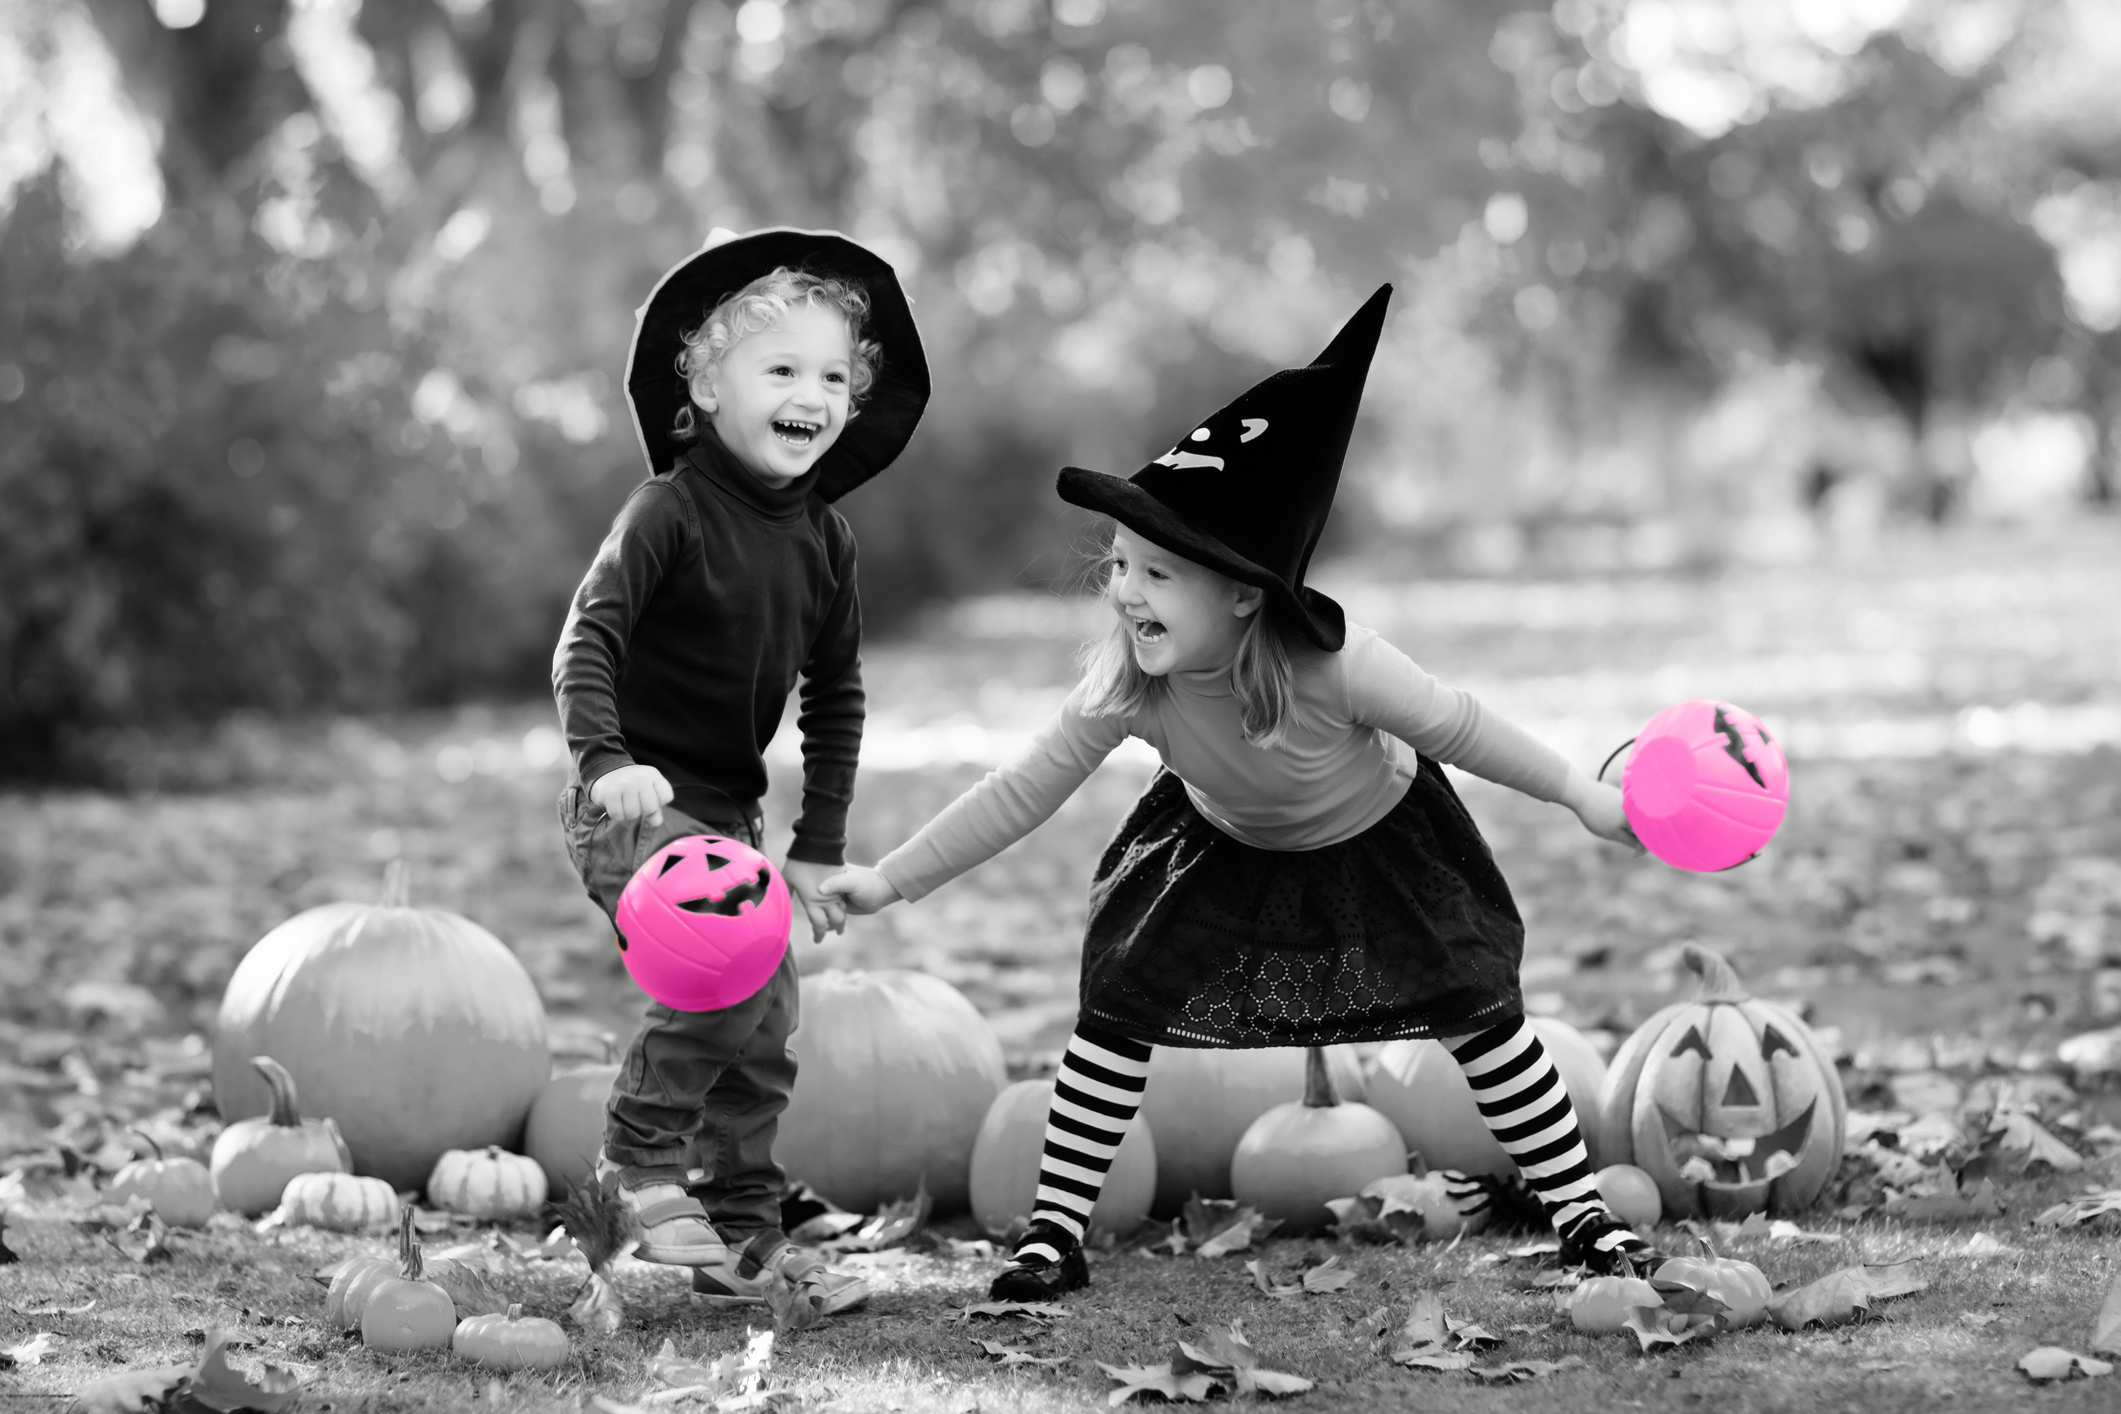 Trick or Treat – The New SRA Rules Image